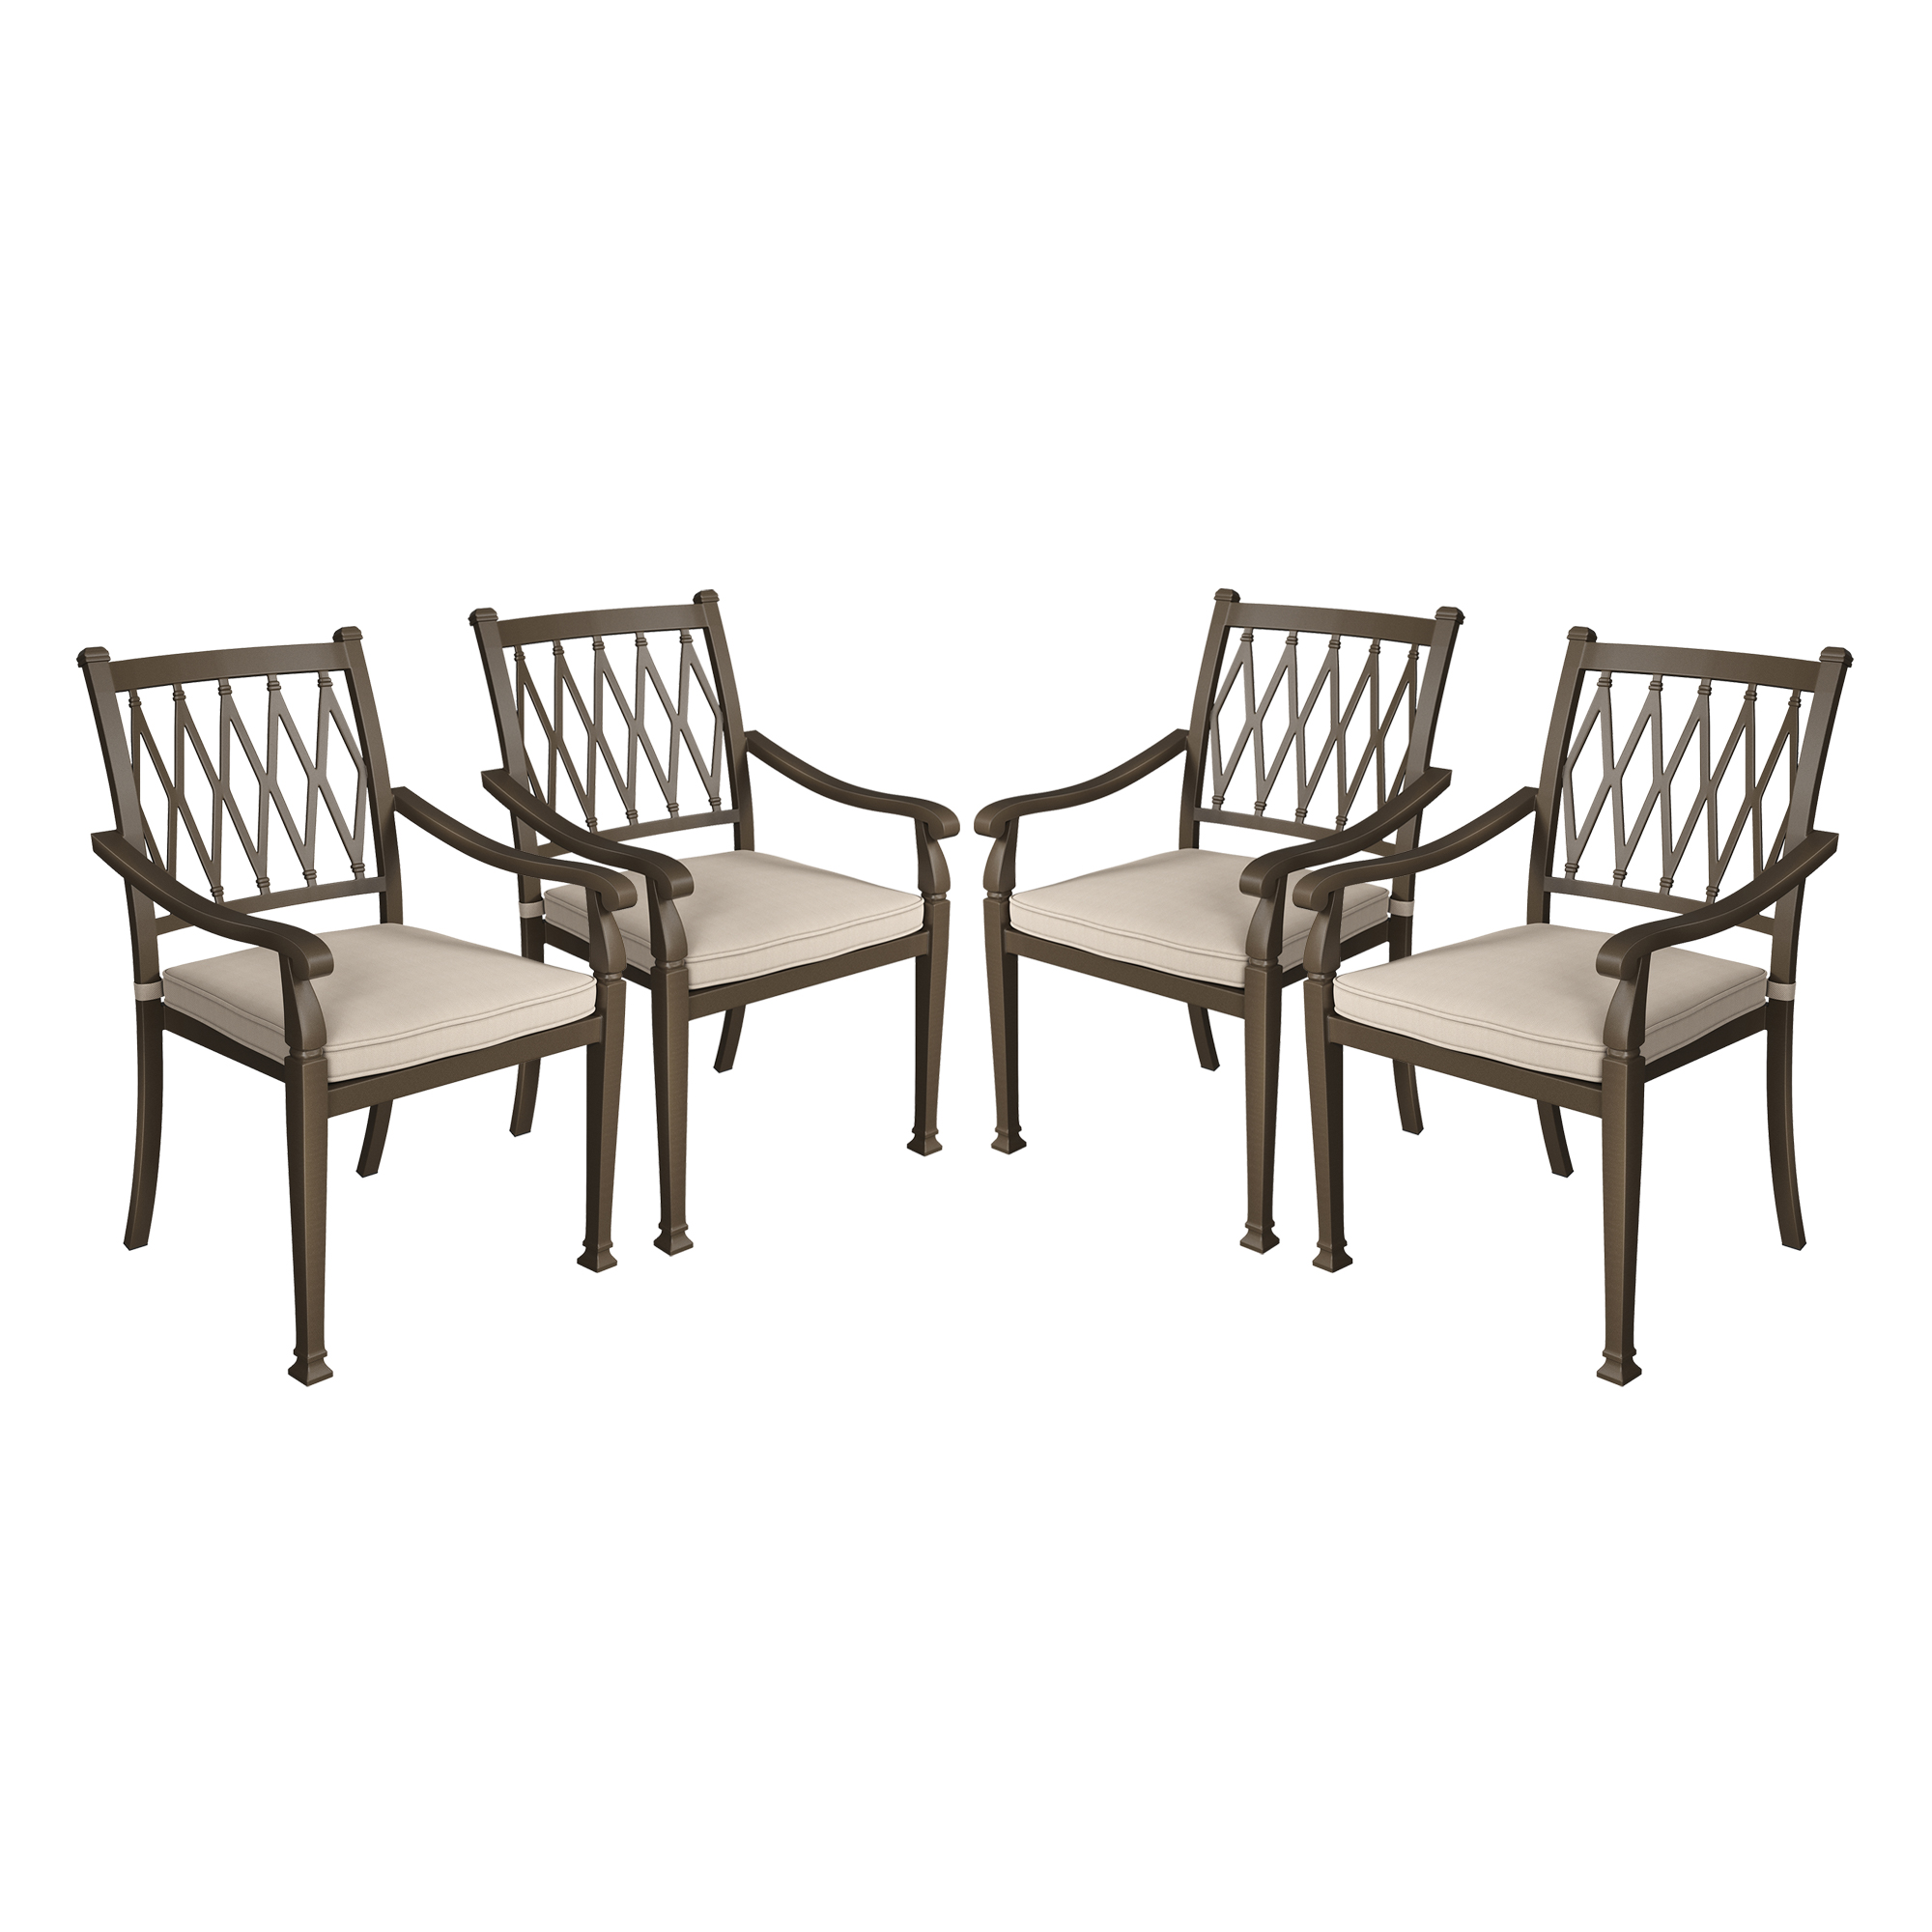 Set of 4 Outdoor Dining Chair Cast Aluminum Frame with Cushion Extra Wide Ergonomic Design Adjustable Foot Pads